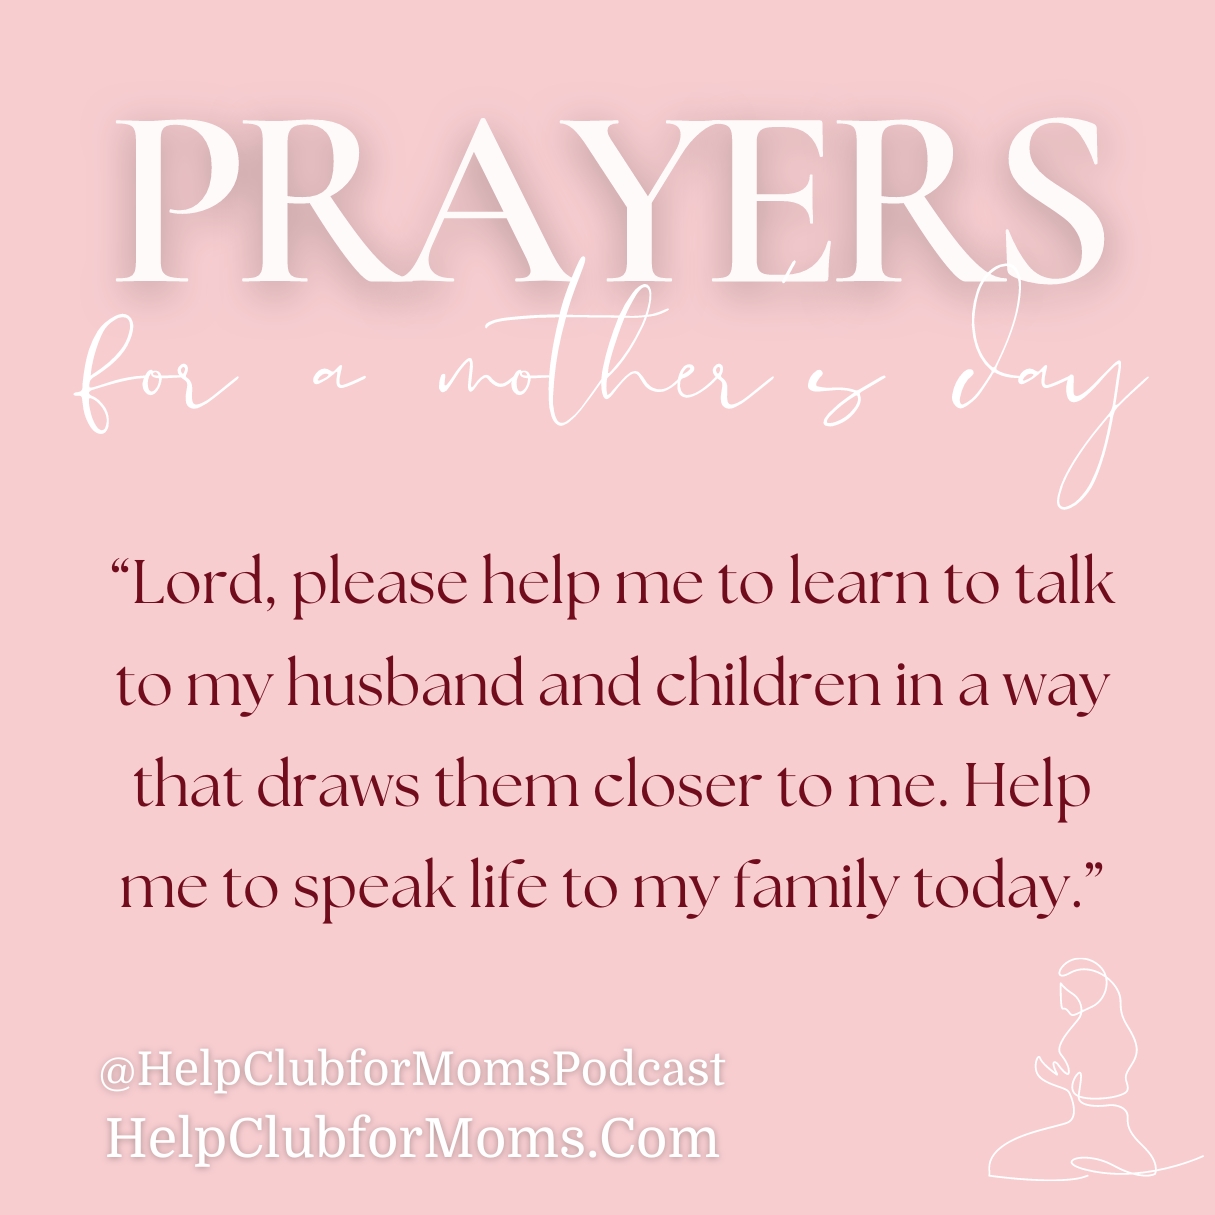 Prayer for Our Words